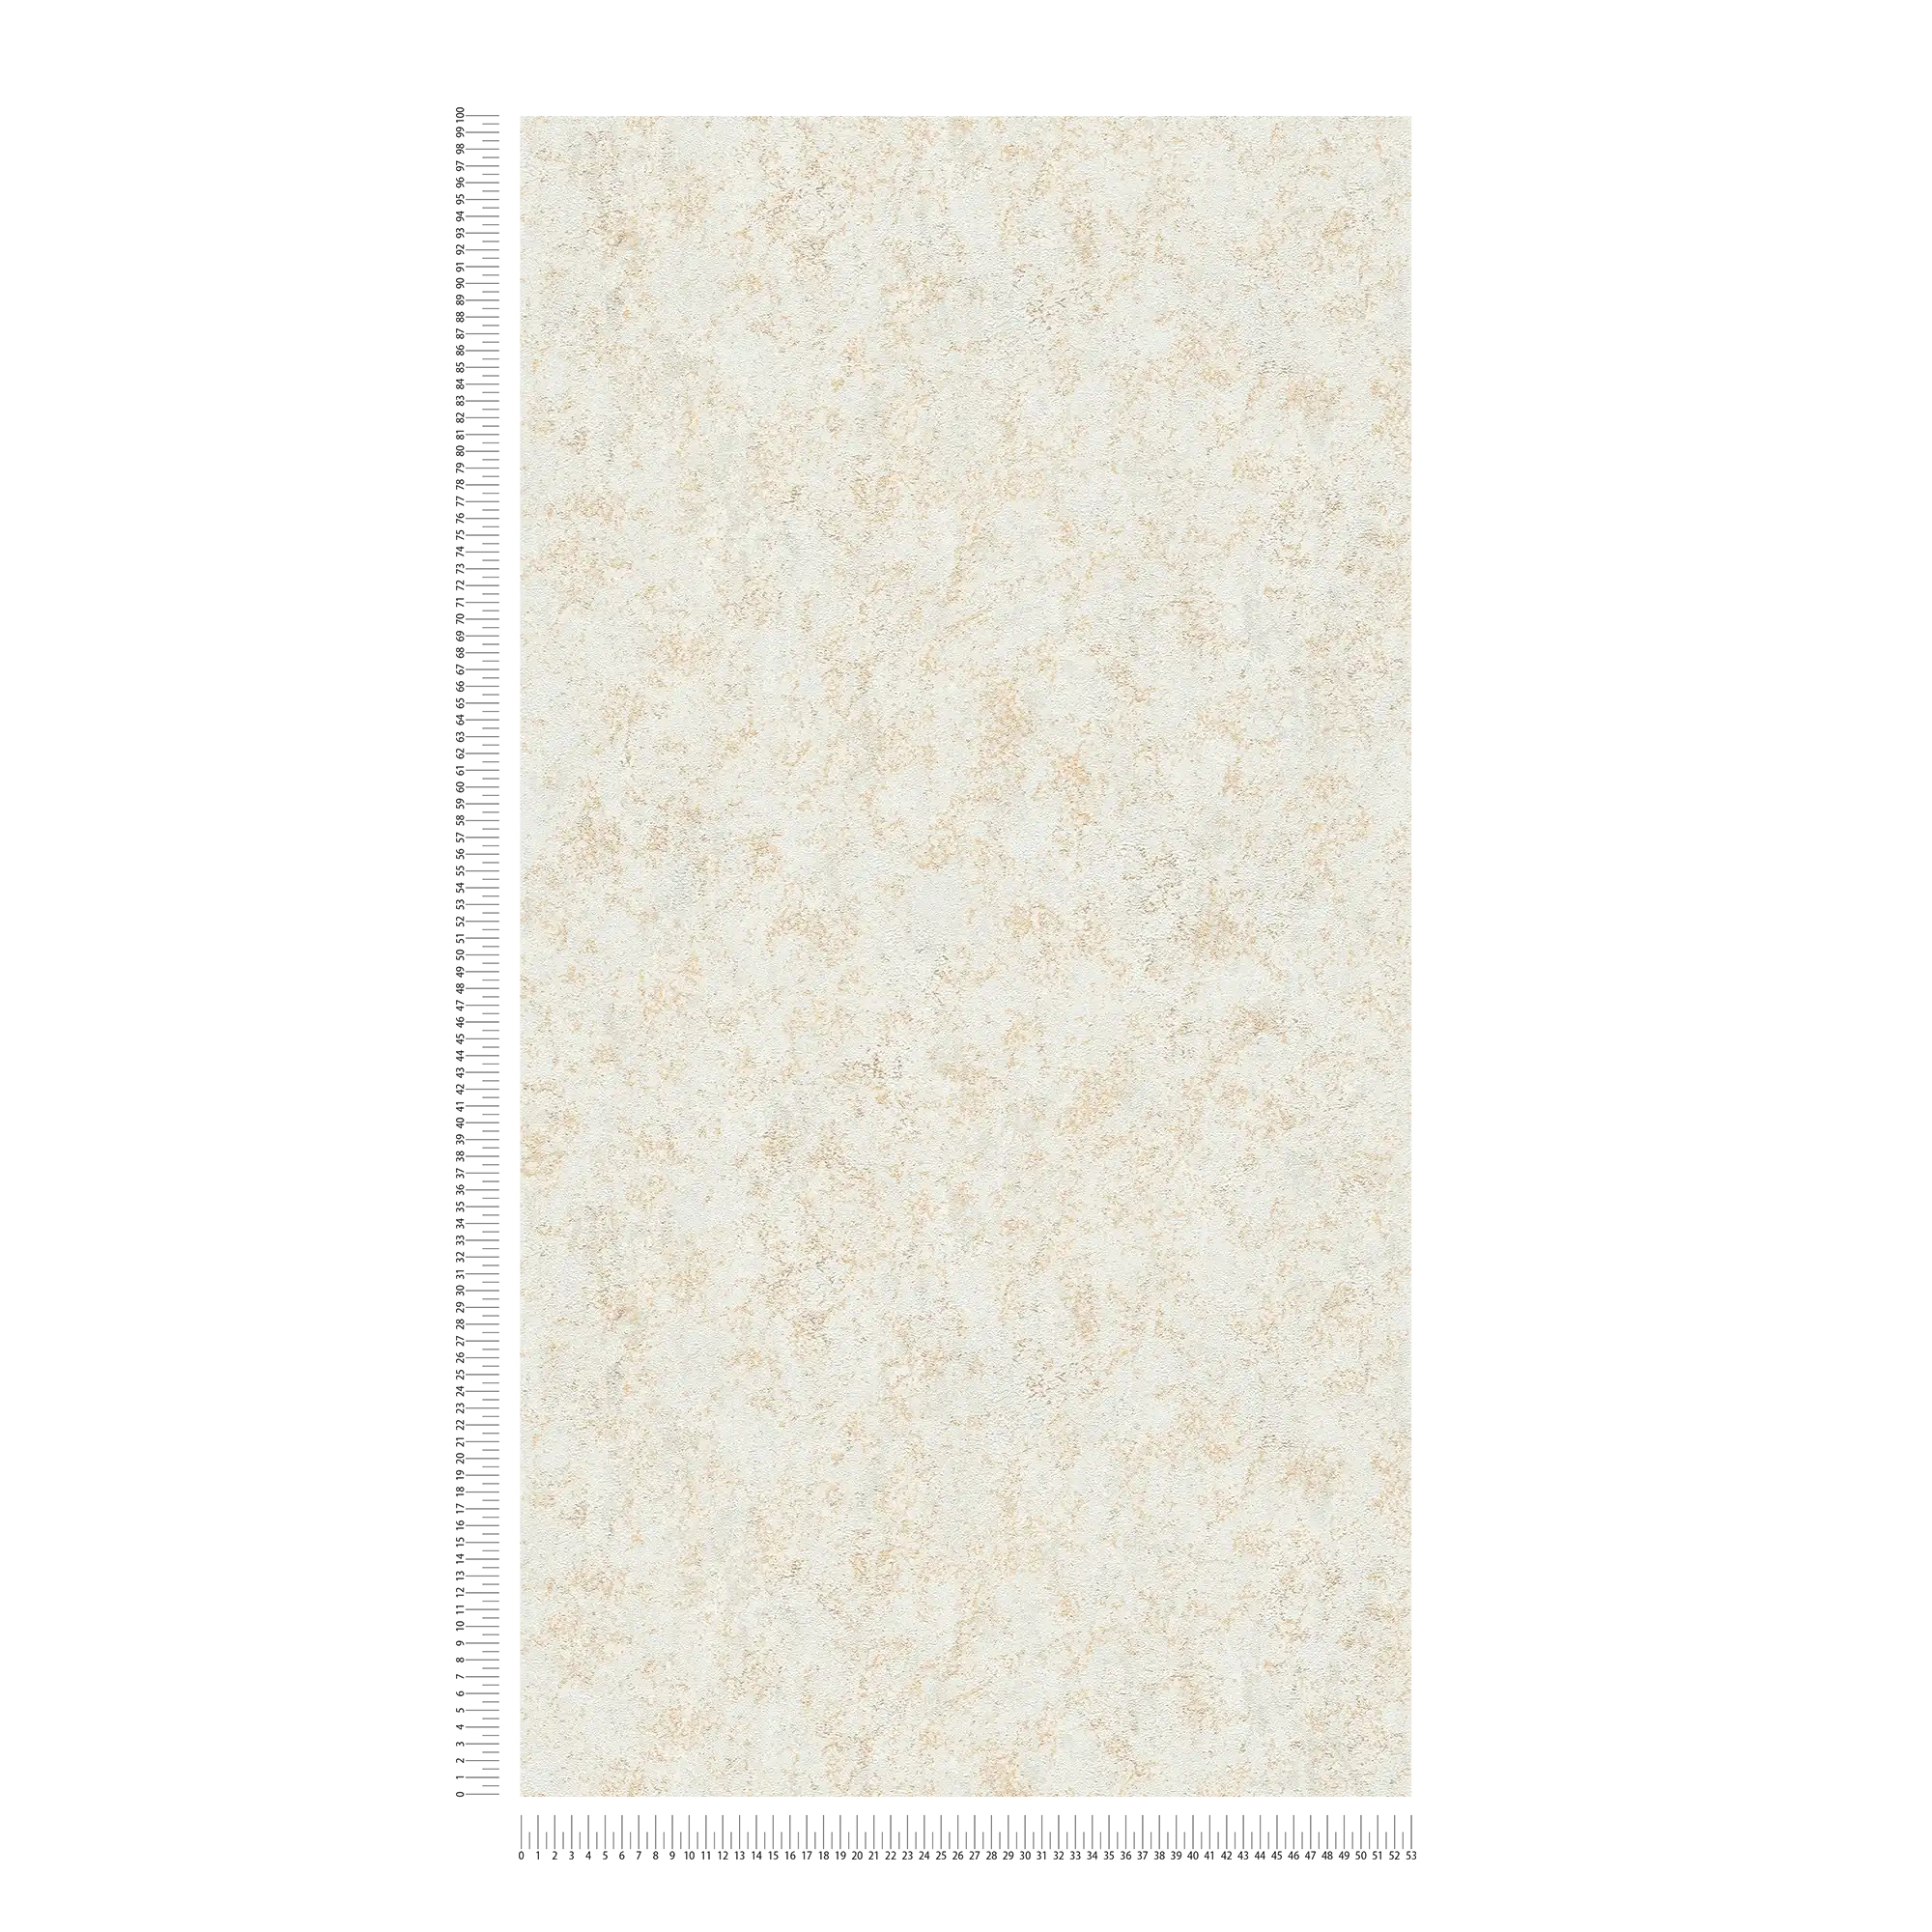             Plain textured wallpaper with metallic effect glossy - gold, light grey, white
        